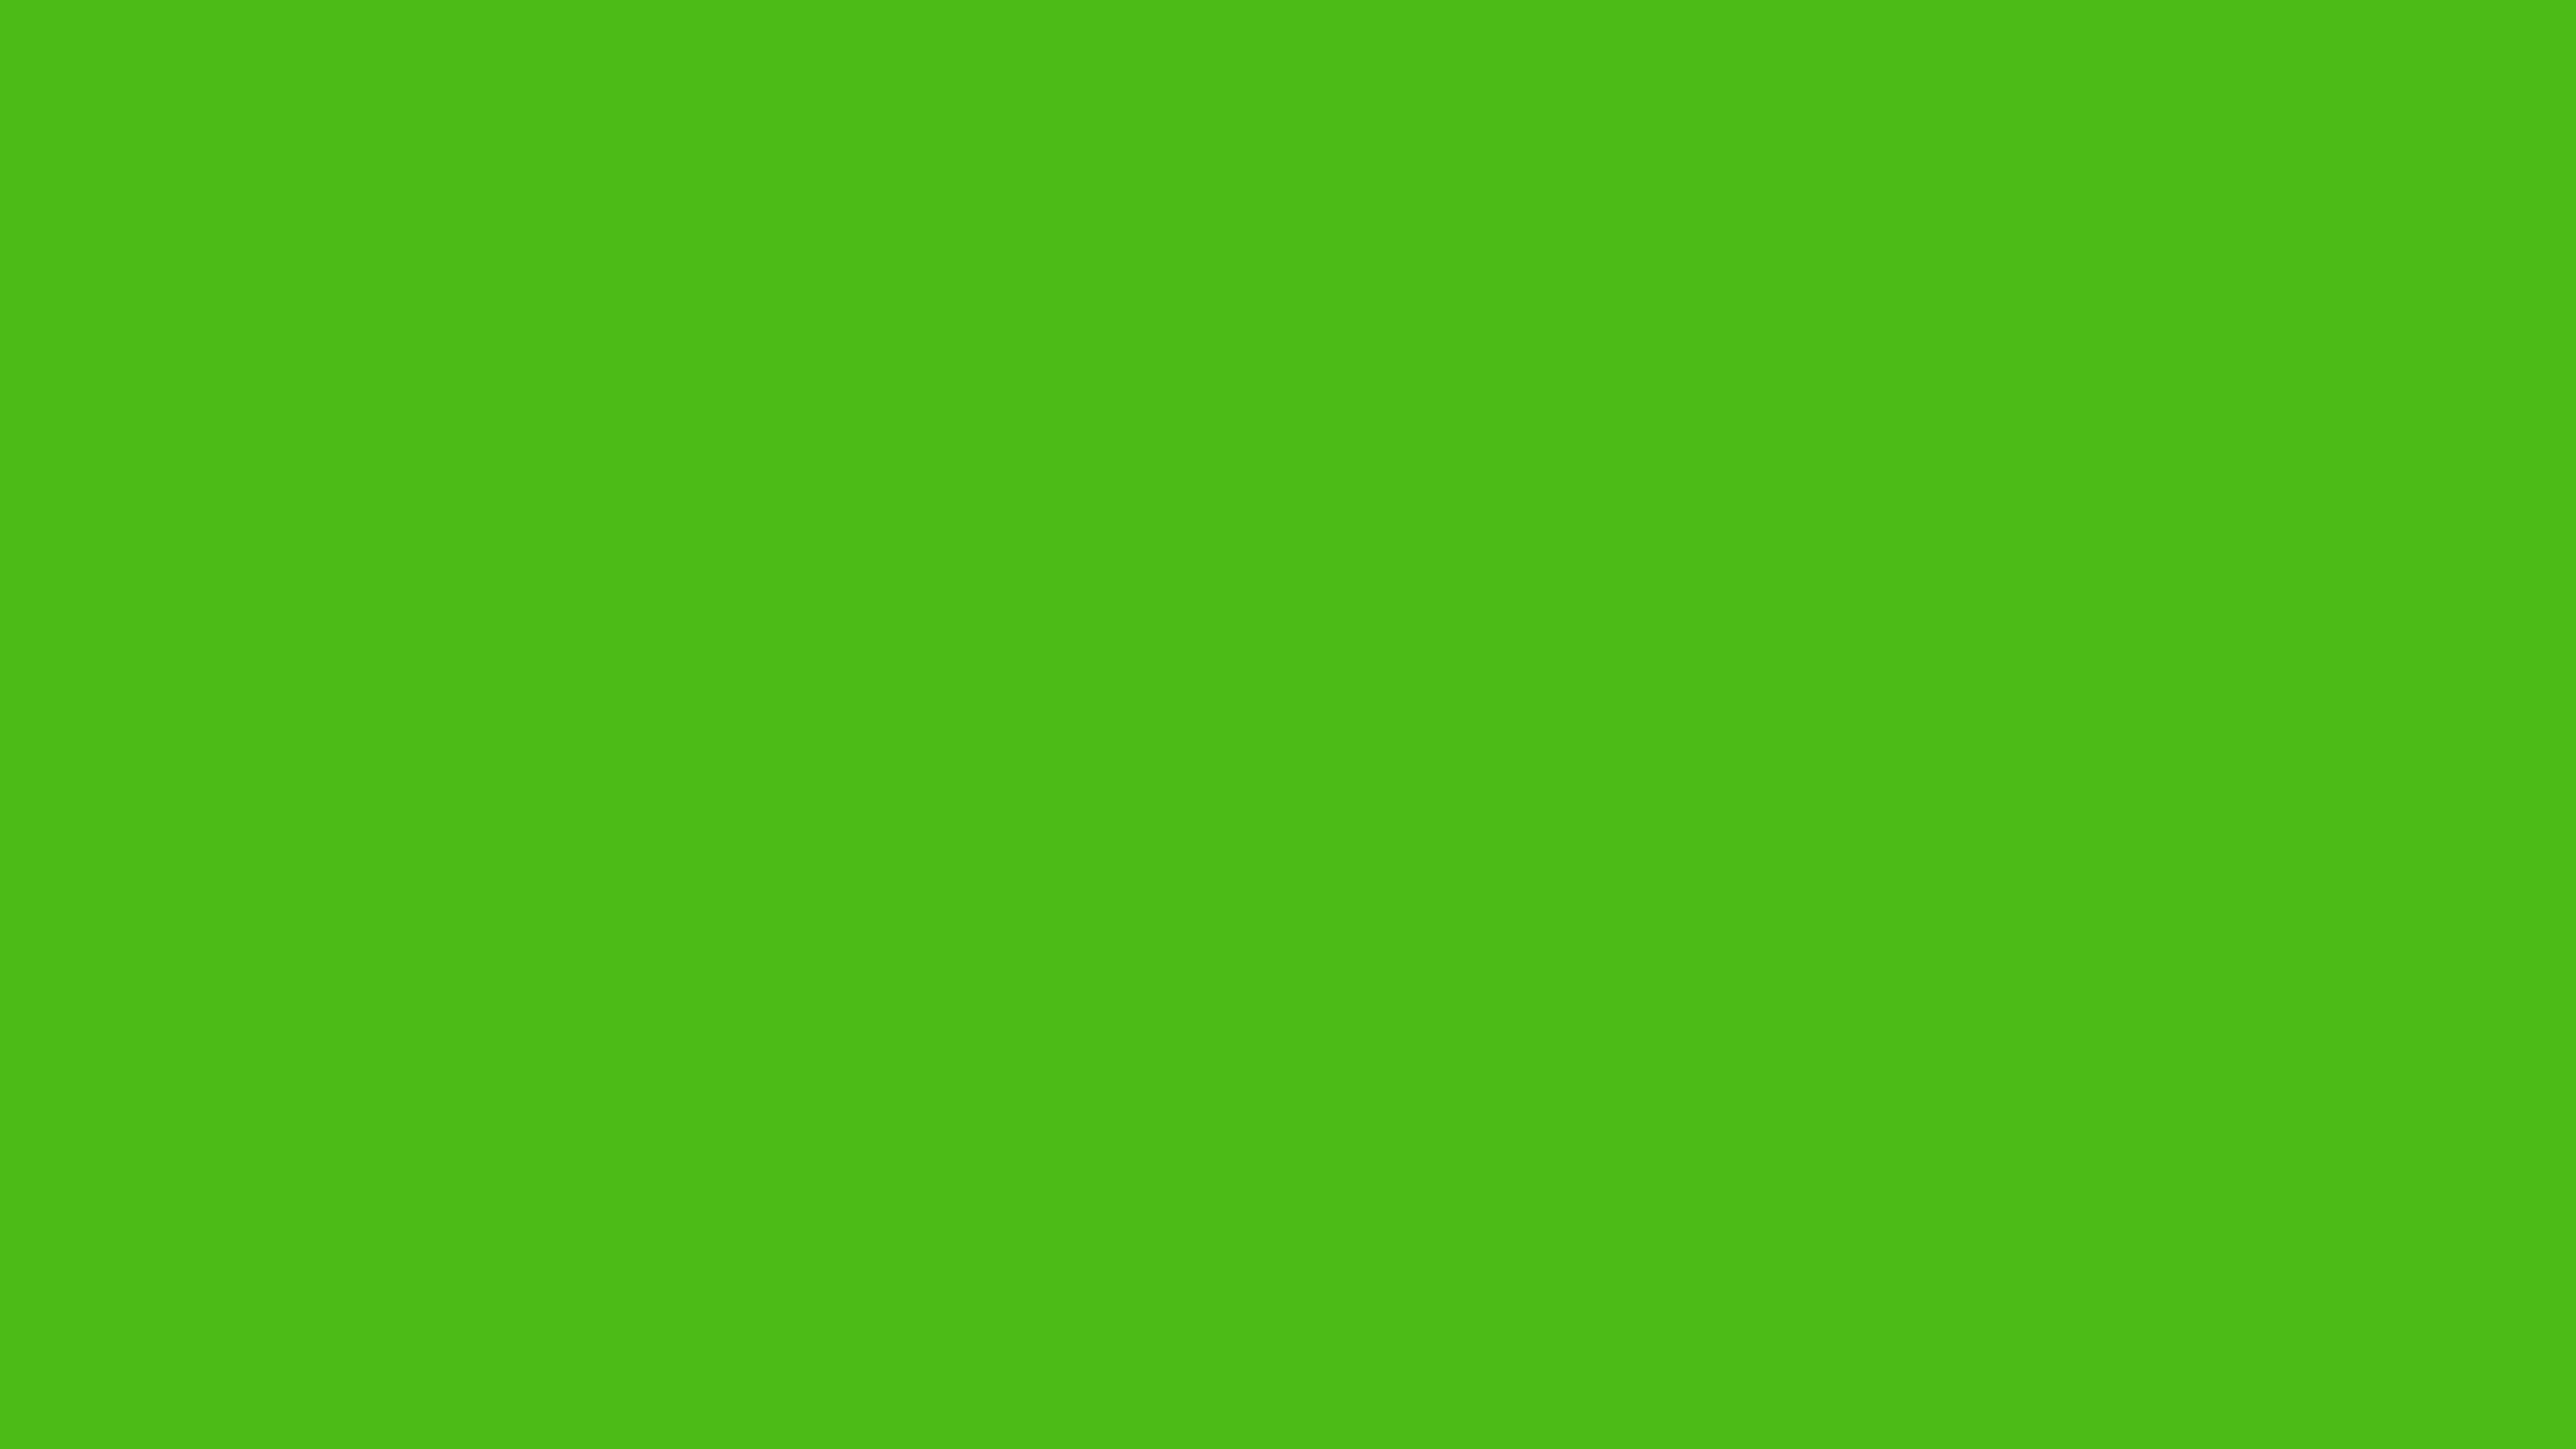 7680x4320 Kelly Green Solid Color Background